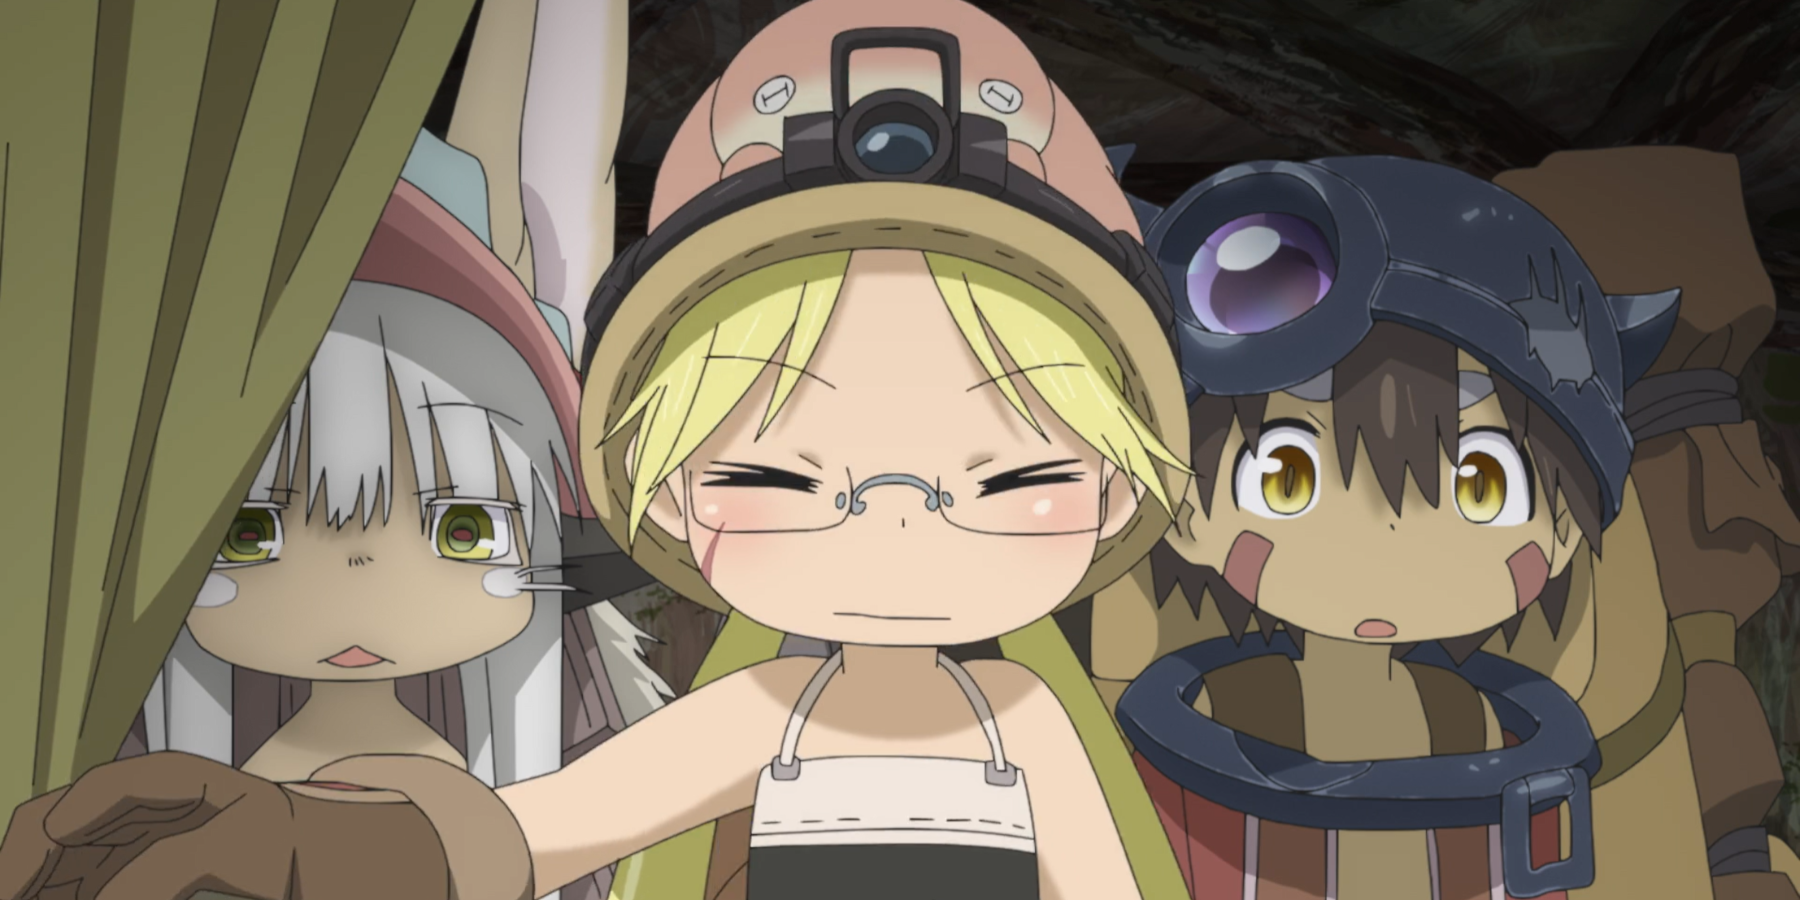 Made in Abyss Season 2, Episode 3